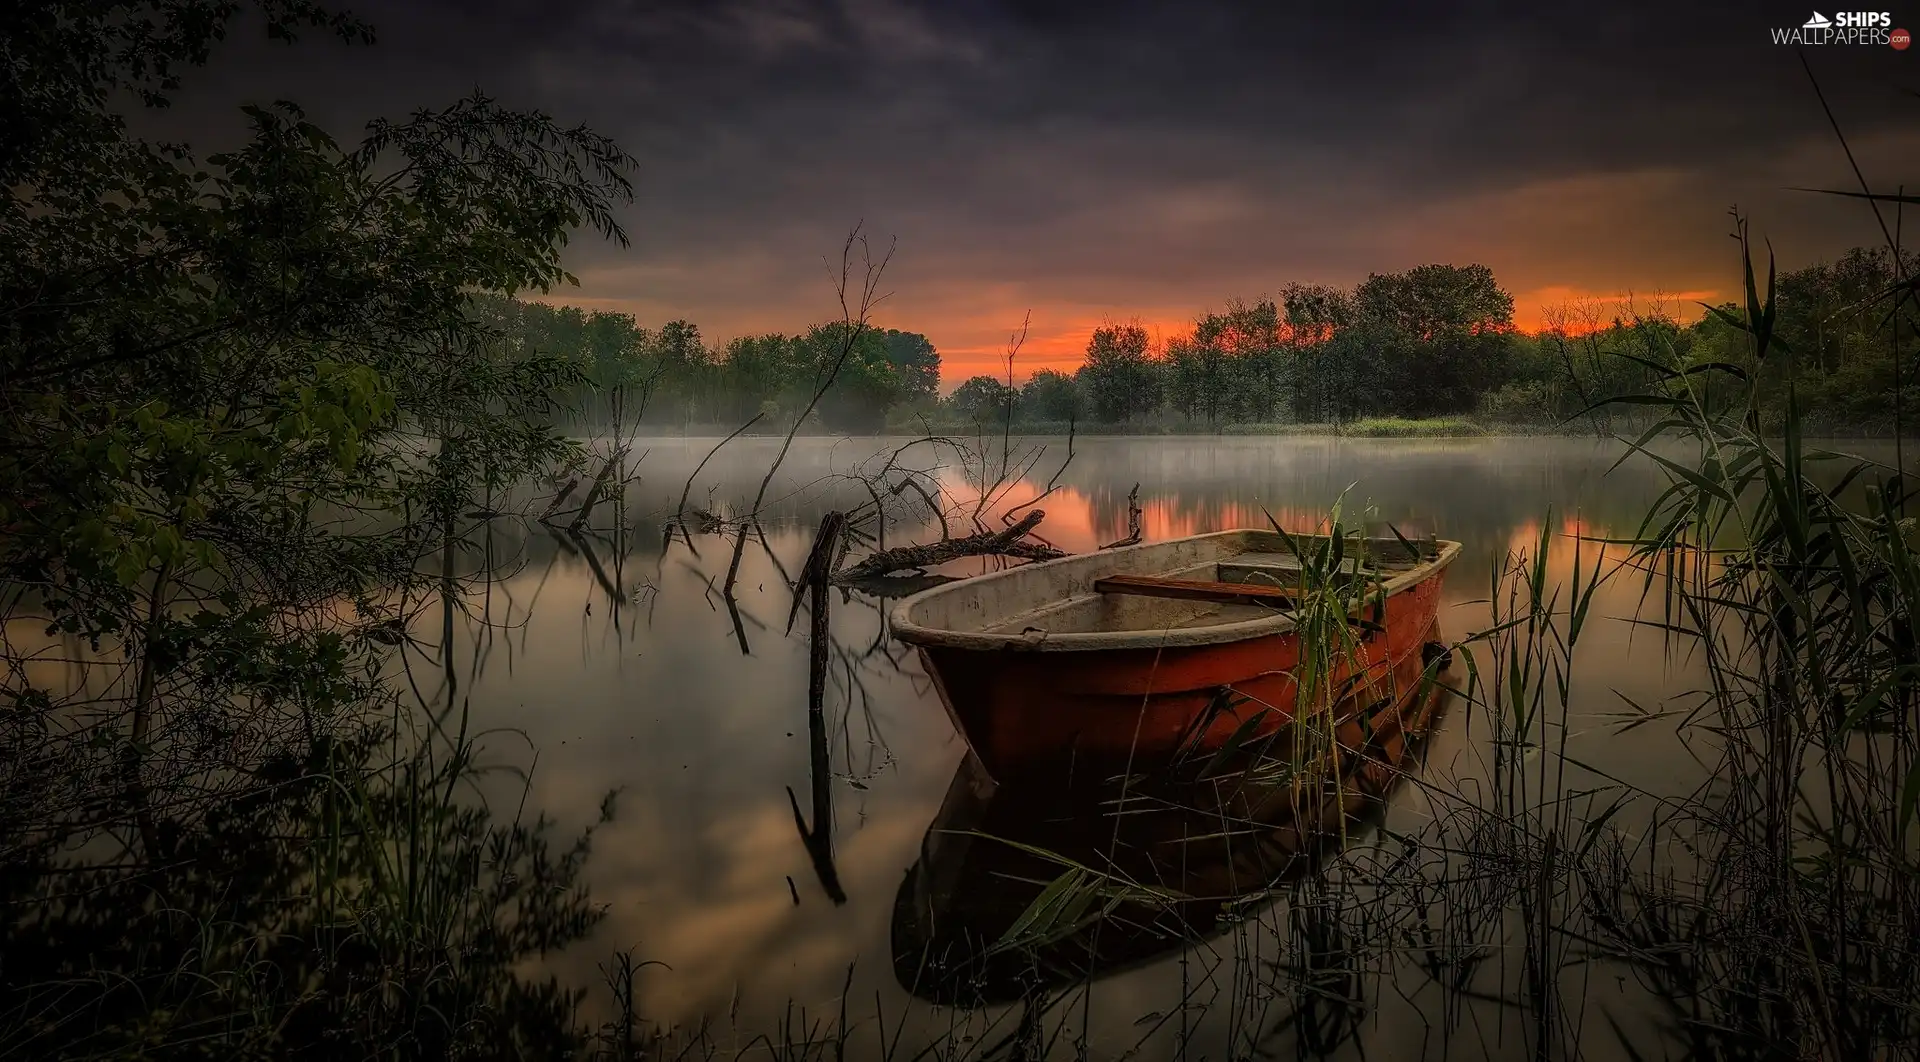 Fog, Boat, viewes, Great Sunsets, lake, trees, grass